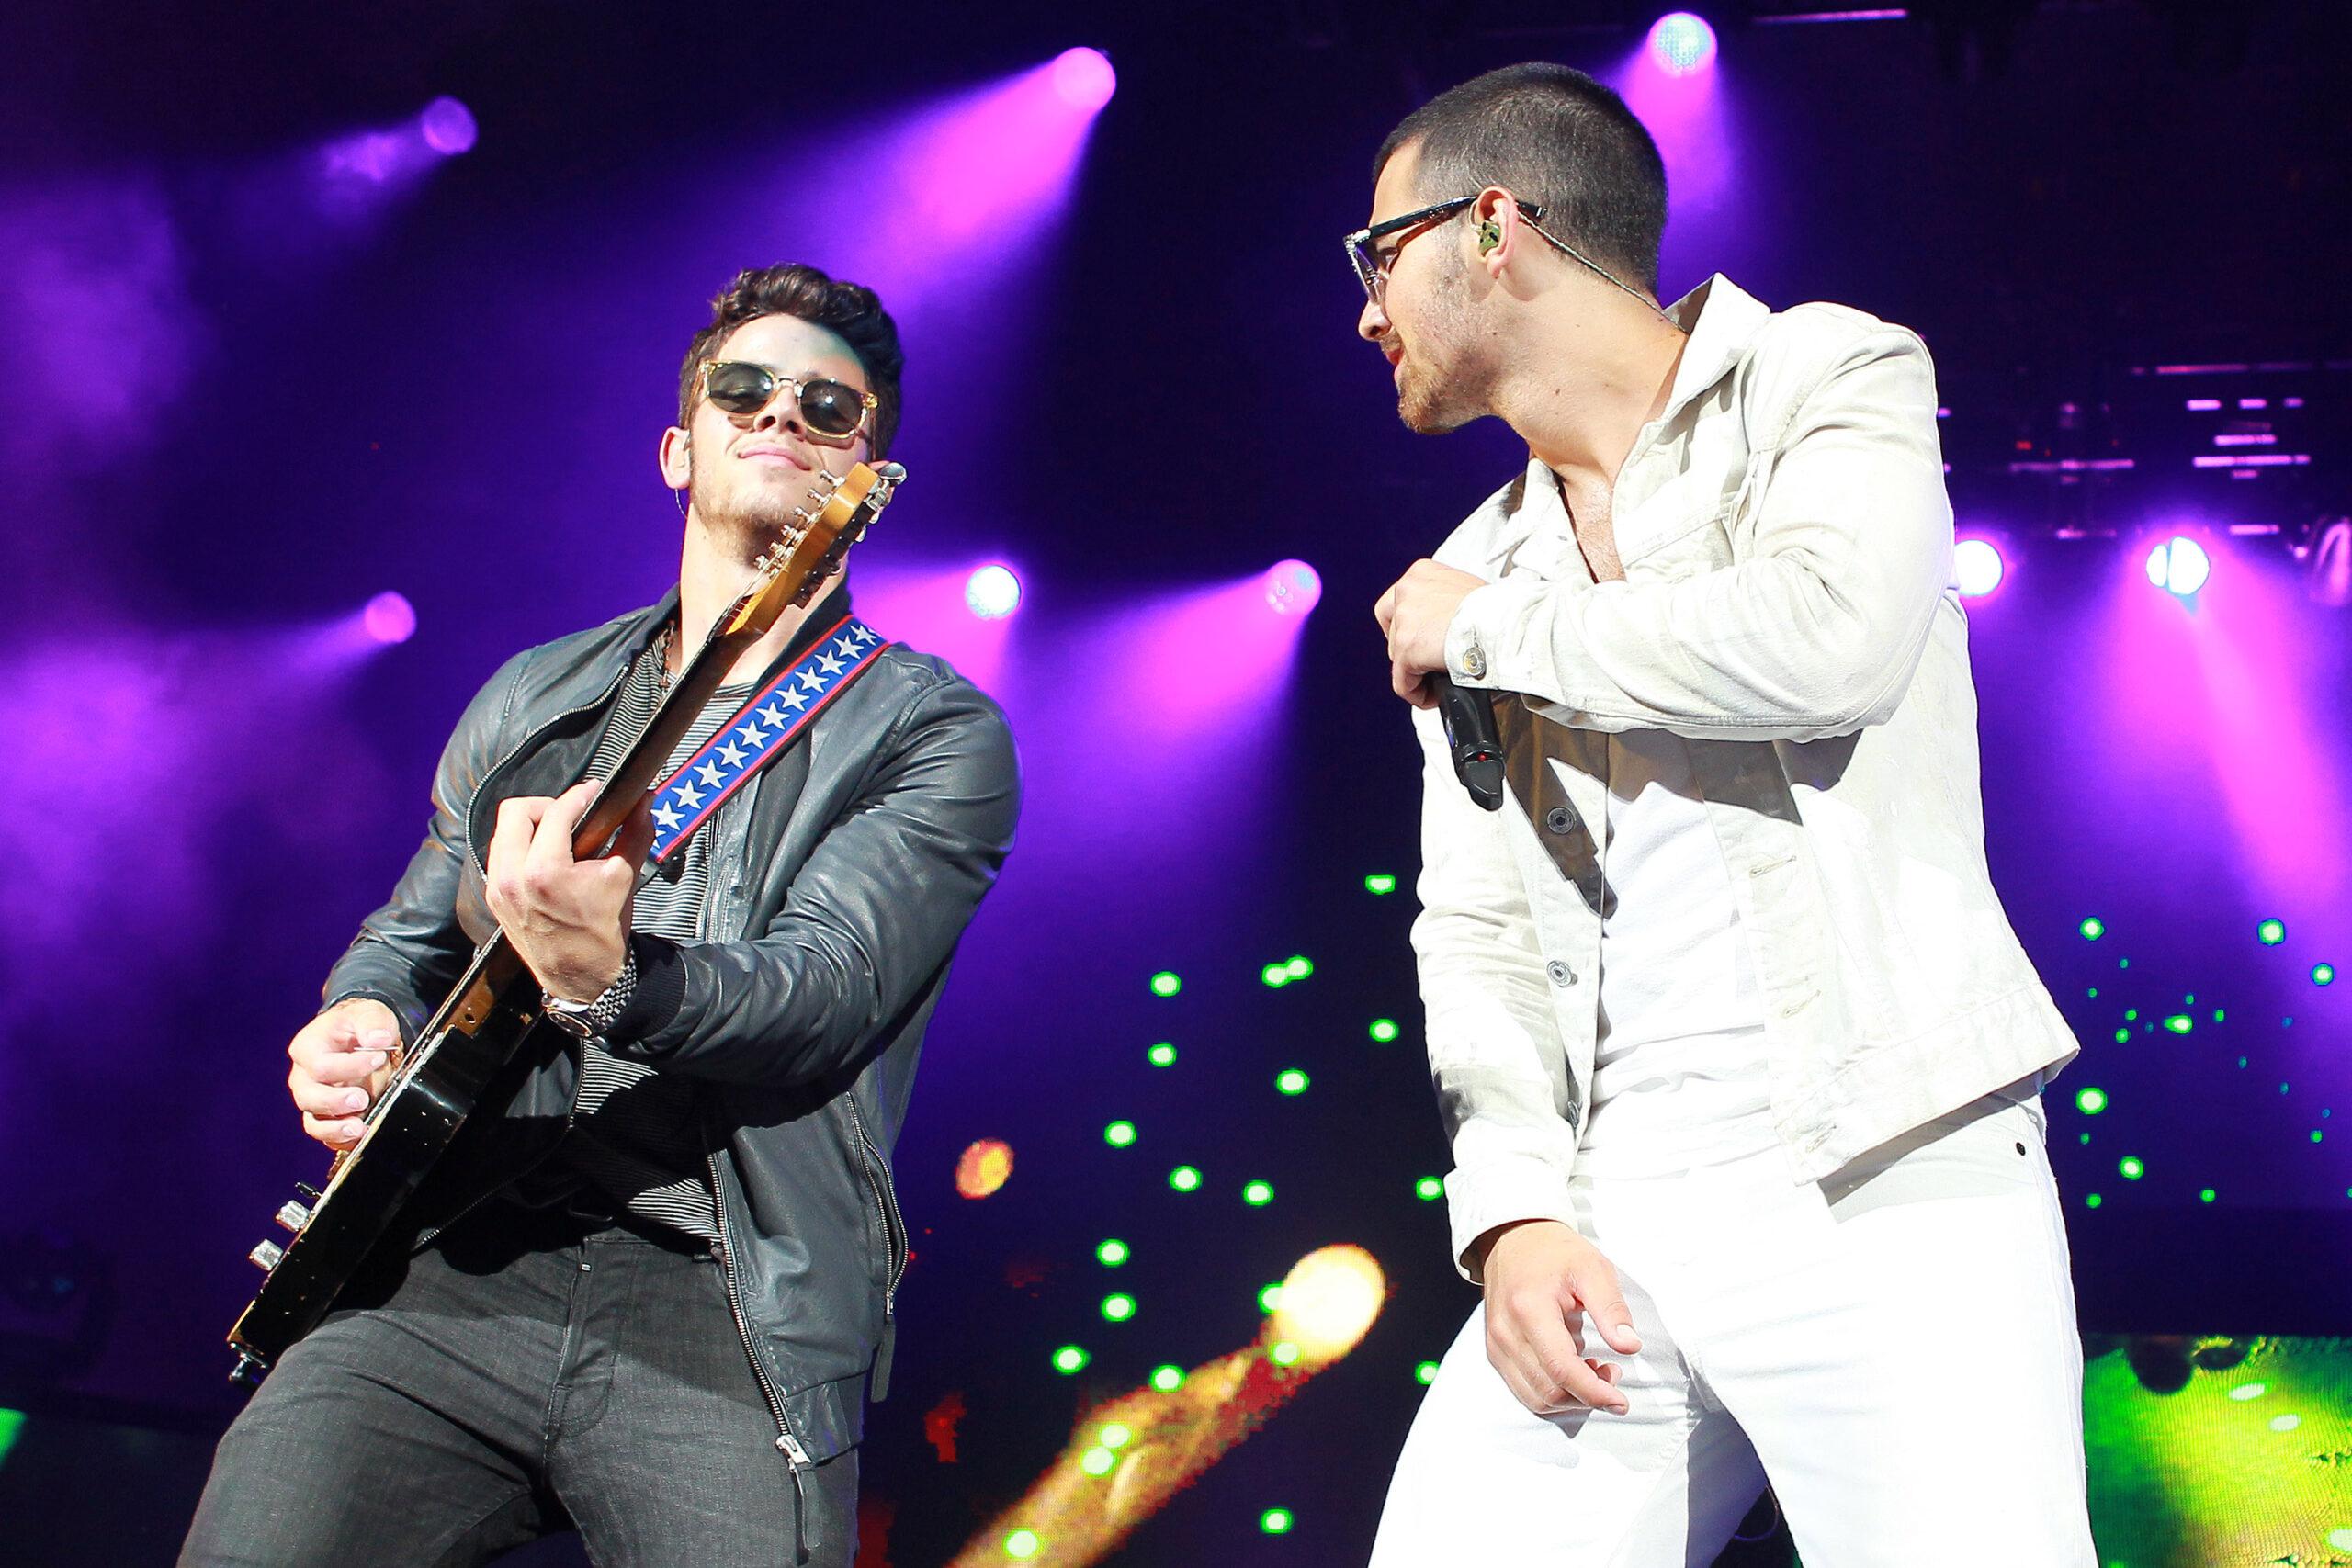 The Jonas Brothers perform at Cruzan Amphitheater in West Palm Beach on 08 02 2013